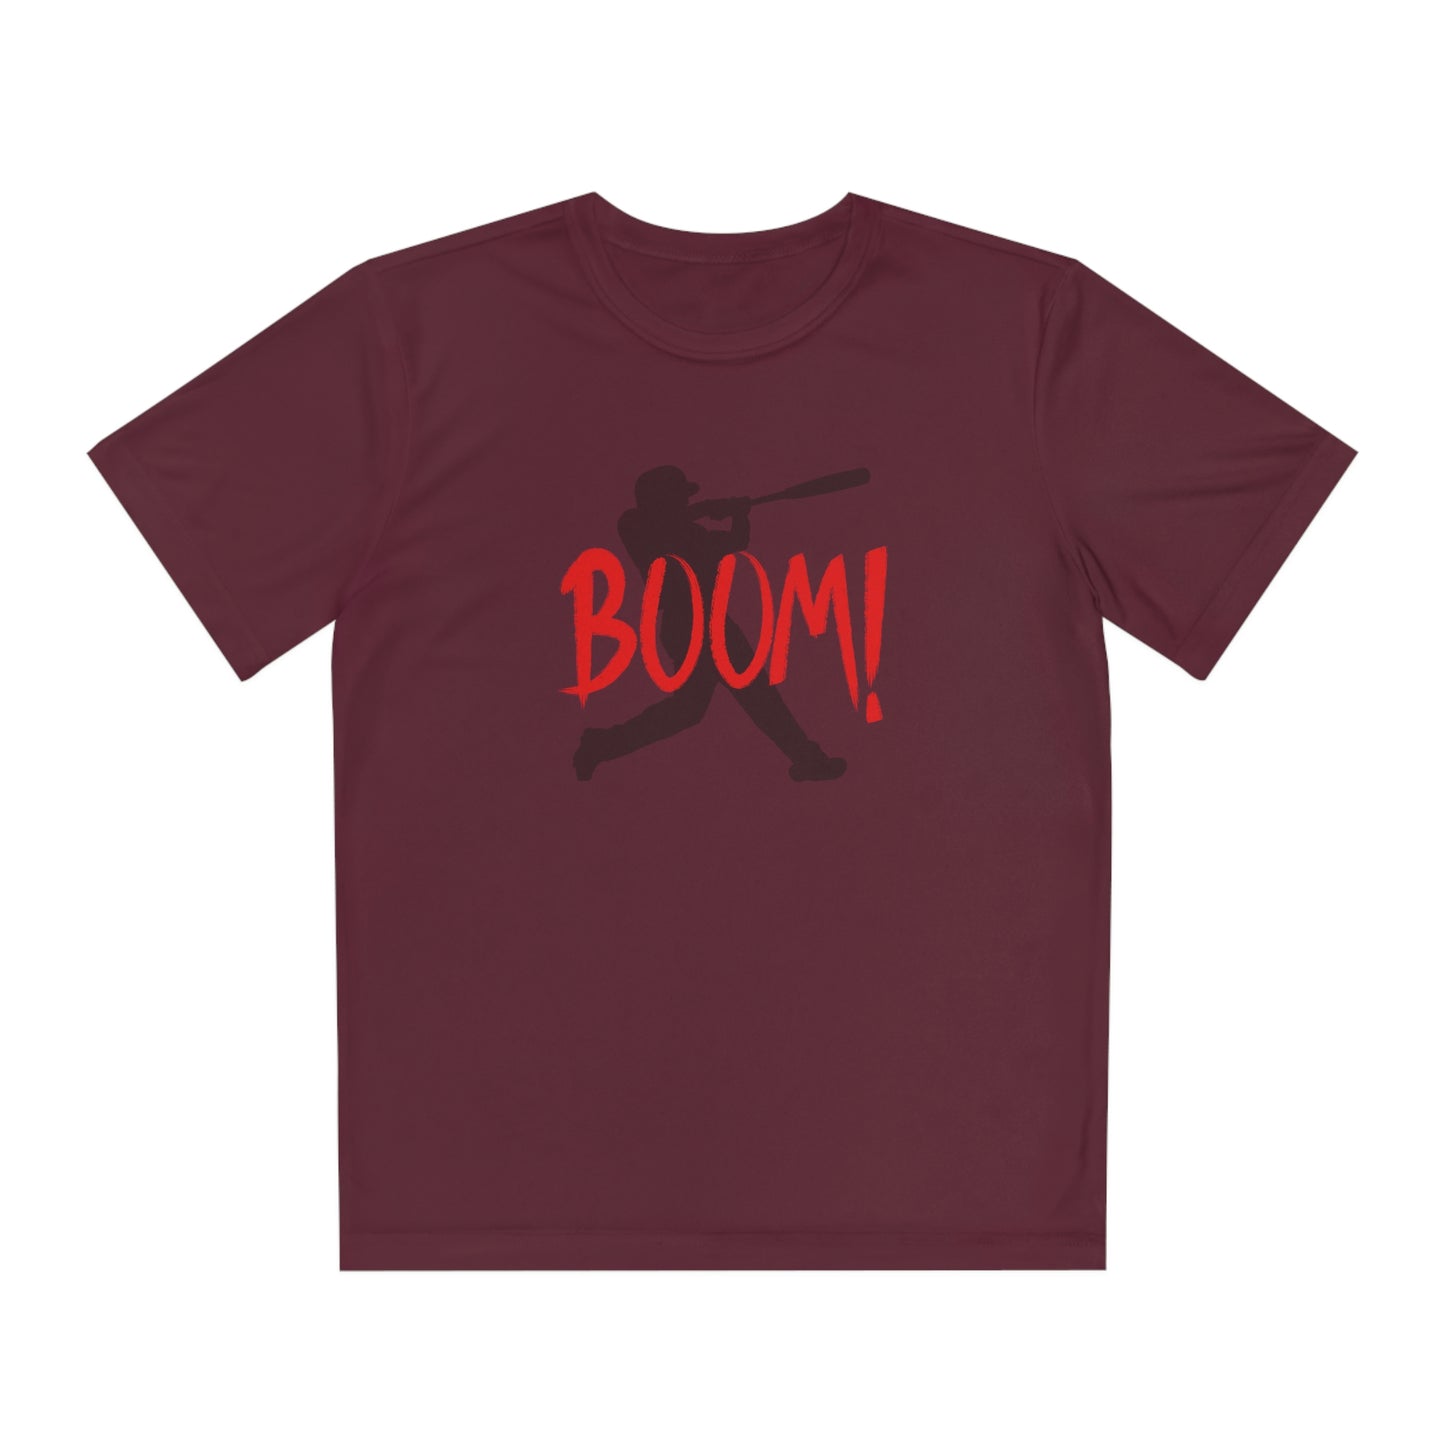 The “BOOM” Youth Competitor Moisture Wicking Tee